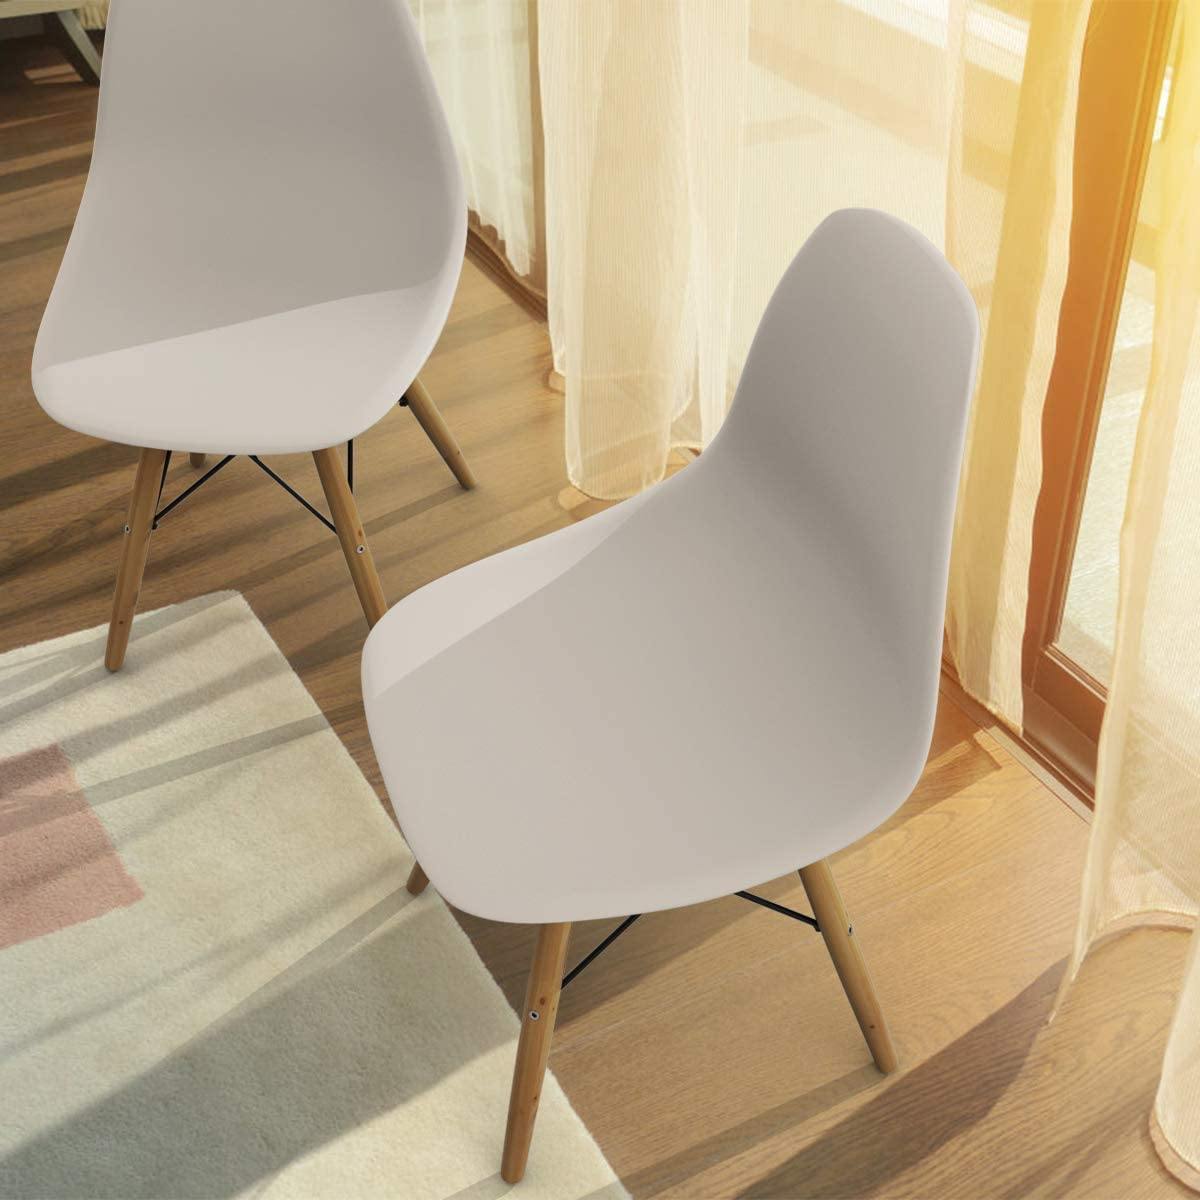 Pre Assembled Mid Century Modern Dining Chairs Set of 2, White - Giantexus